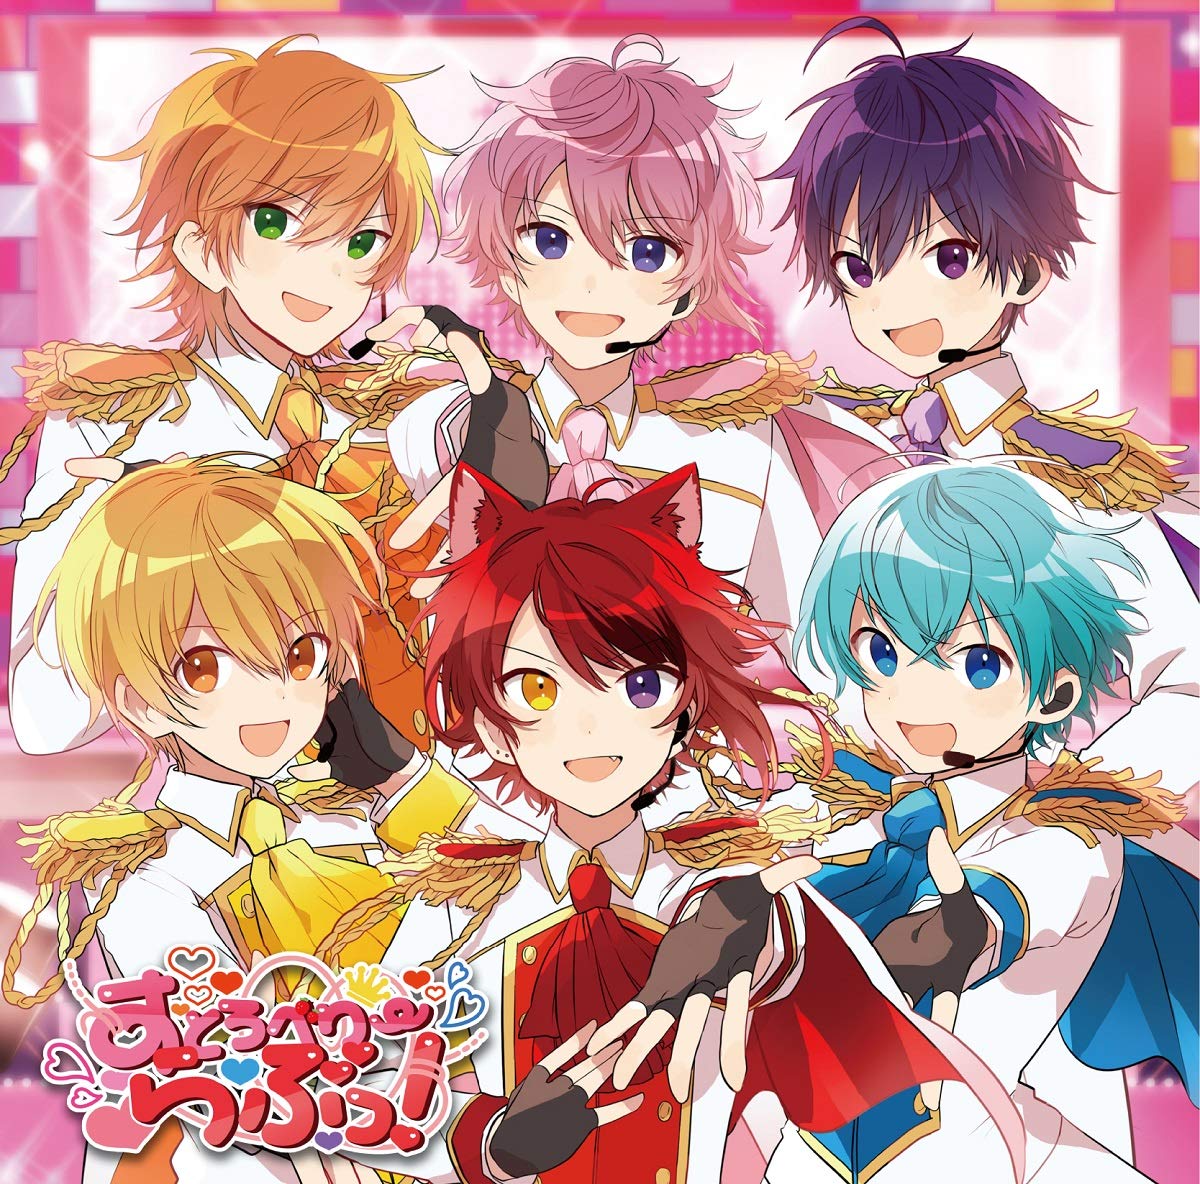 Cover for『Strawberry Prince - King of Judoutai』from the release『Strawberry Love!』